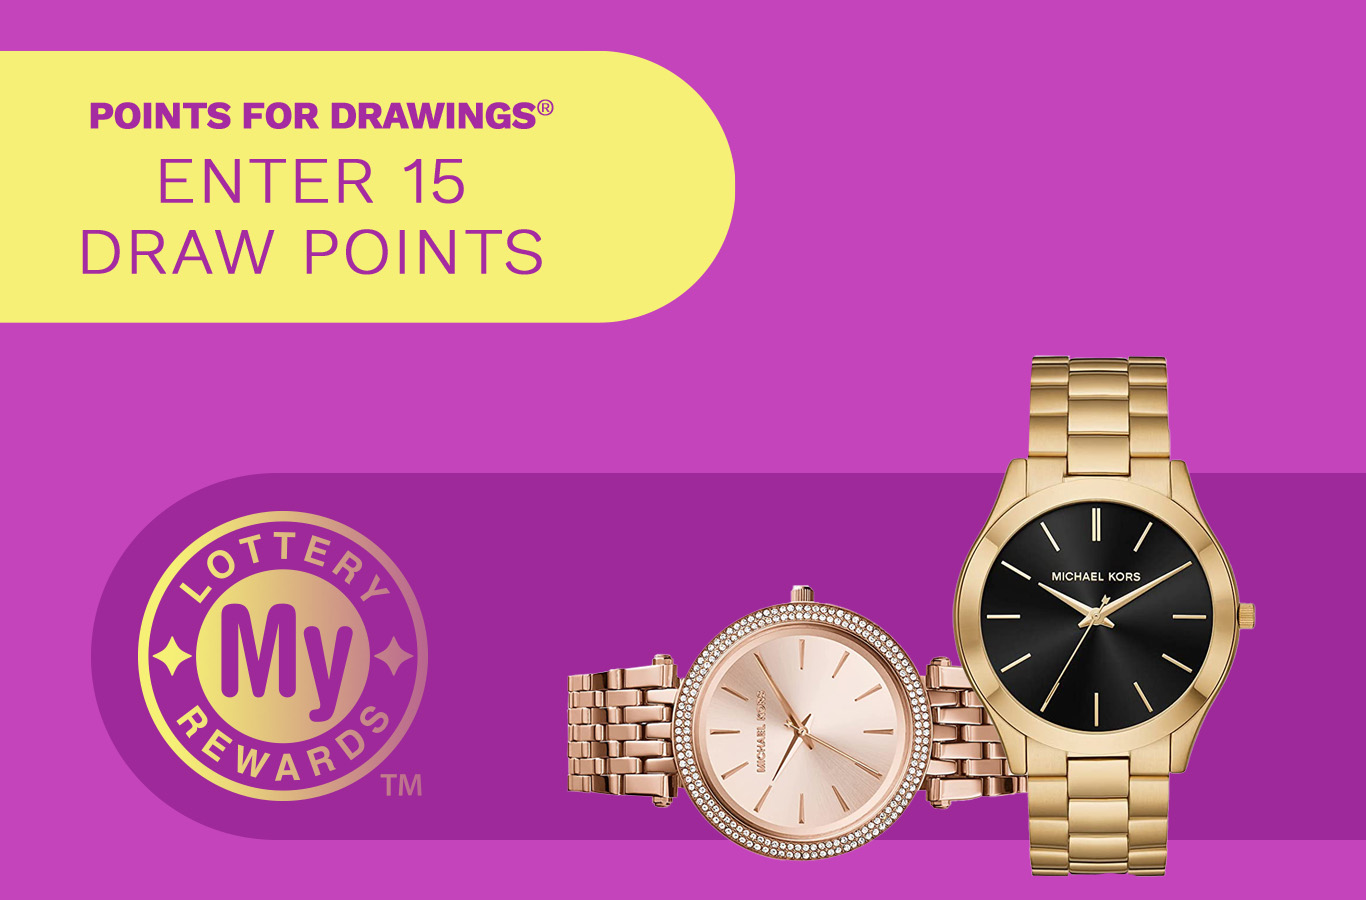 Here's your chance to win His and Hers Michael Kors® Watches! Enter by Tuesday, December 6th.